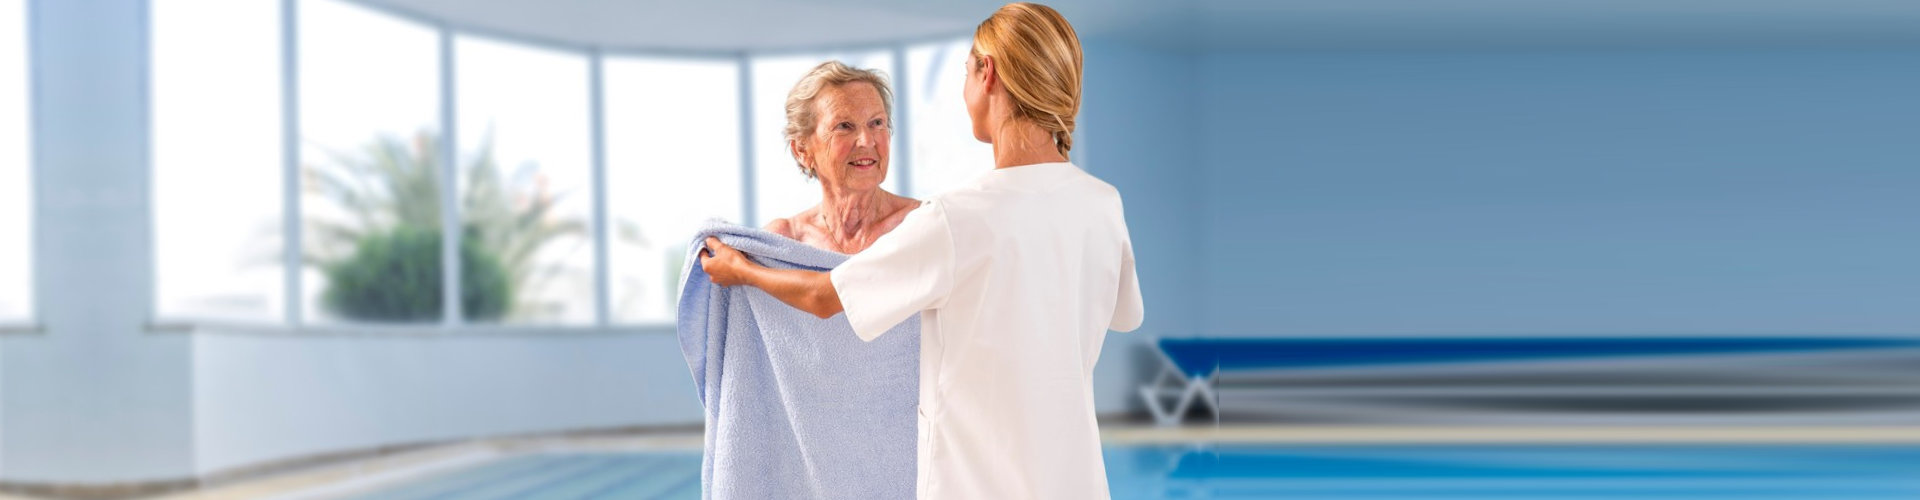 caregiver giving towel to a senior woman